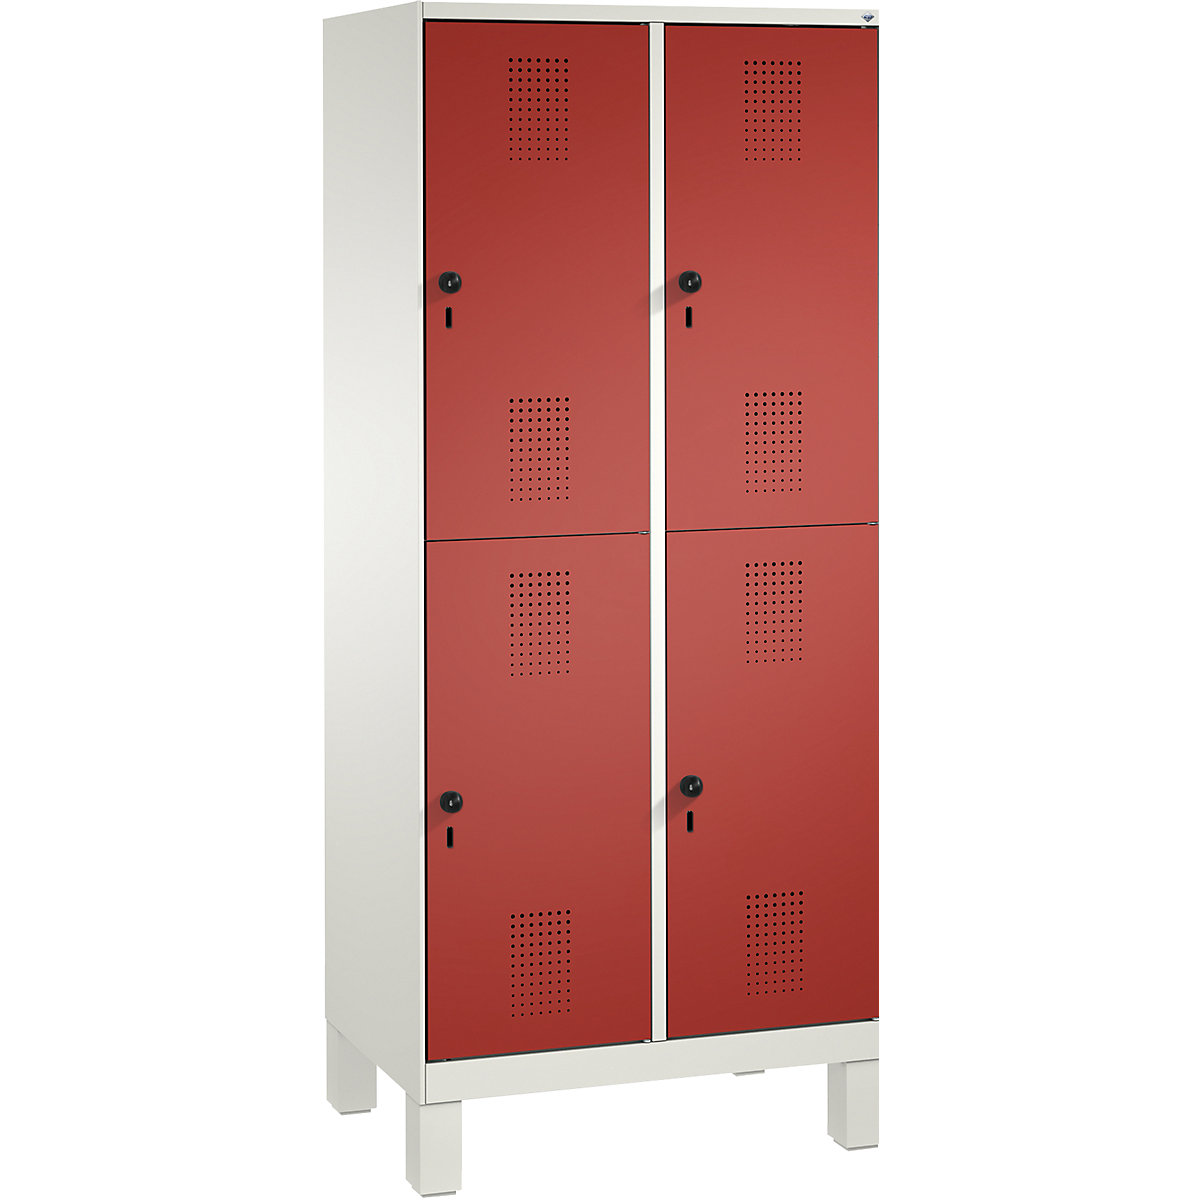 EVOLO cloakroom locker, double tier, with feet – C+P, 2 compartments, 2 shelf compartments each, compartment width 400 mm, traffic white / flame red-5